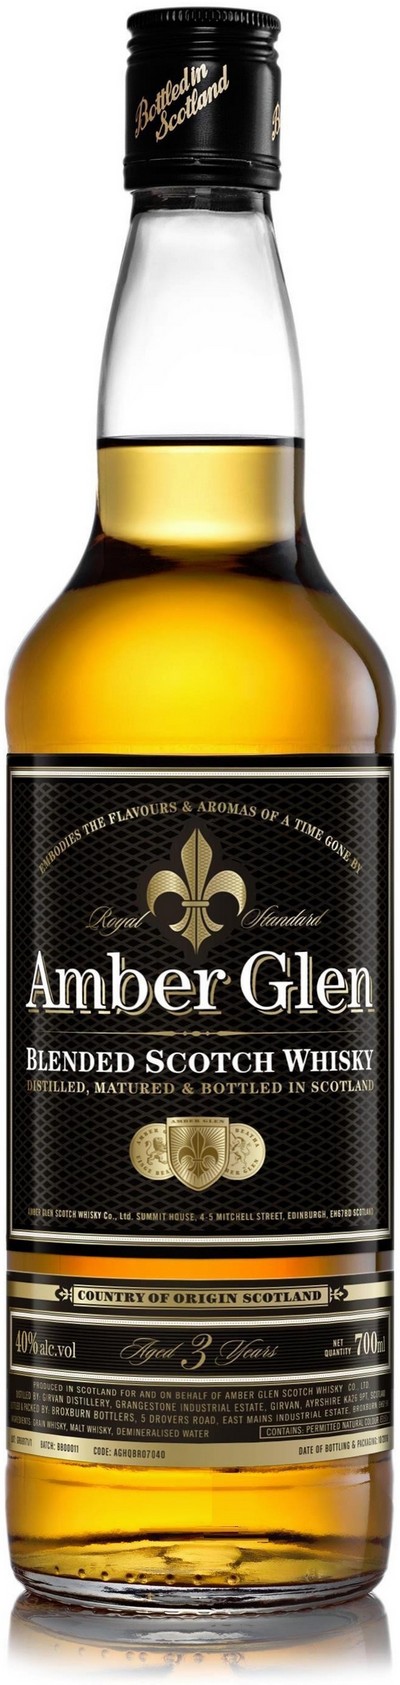 amber-glen-blended-scotch-whisky-aged-3-years